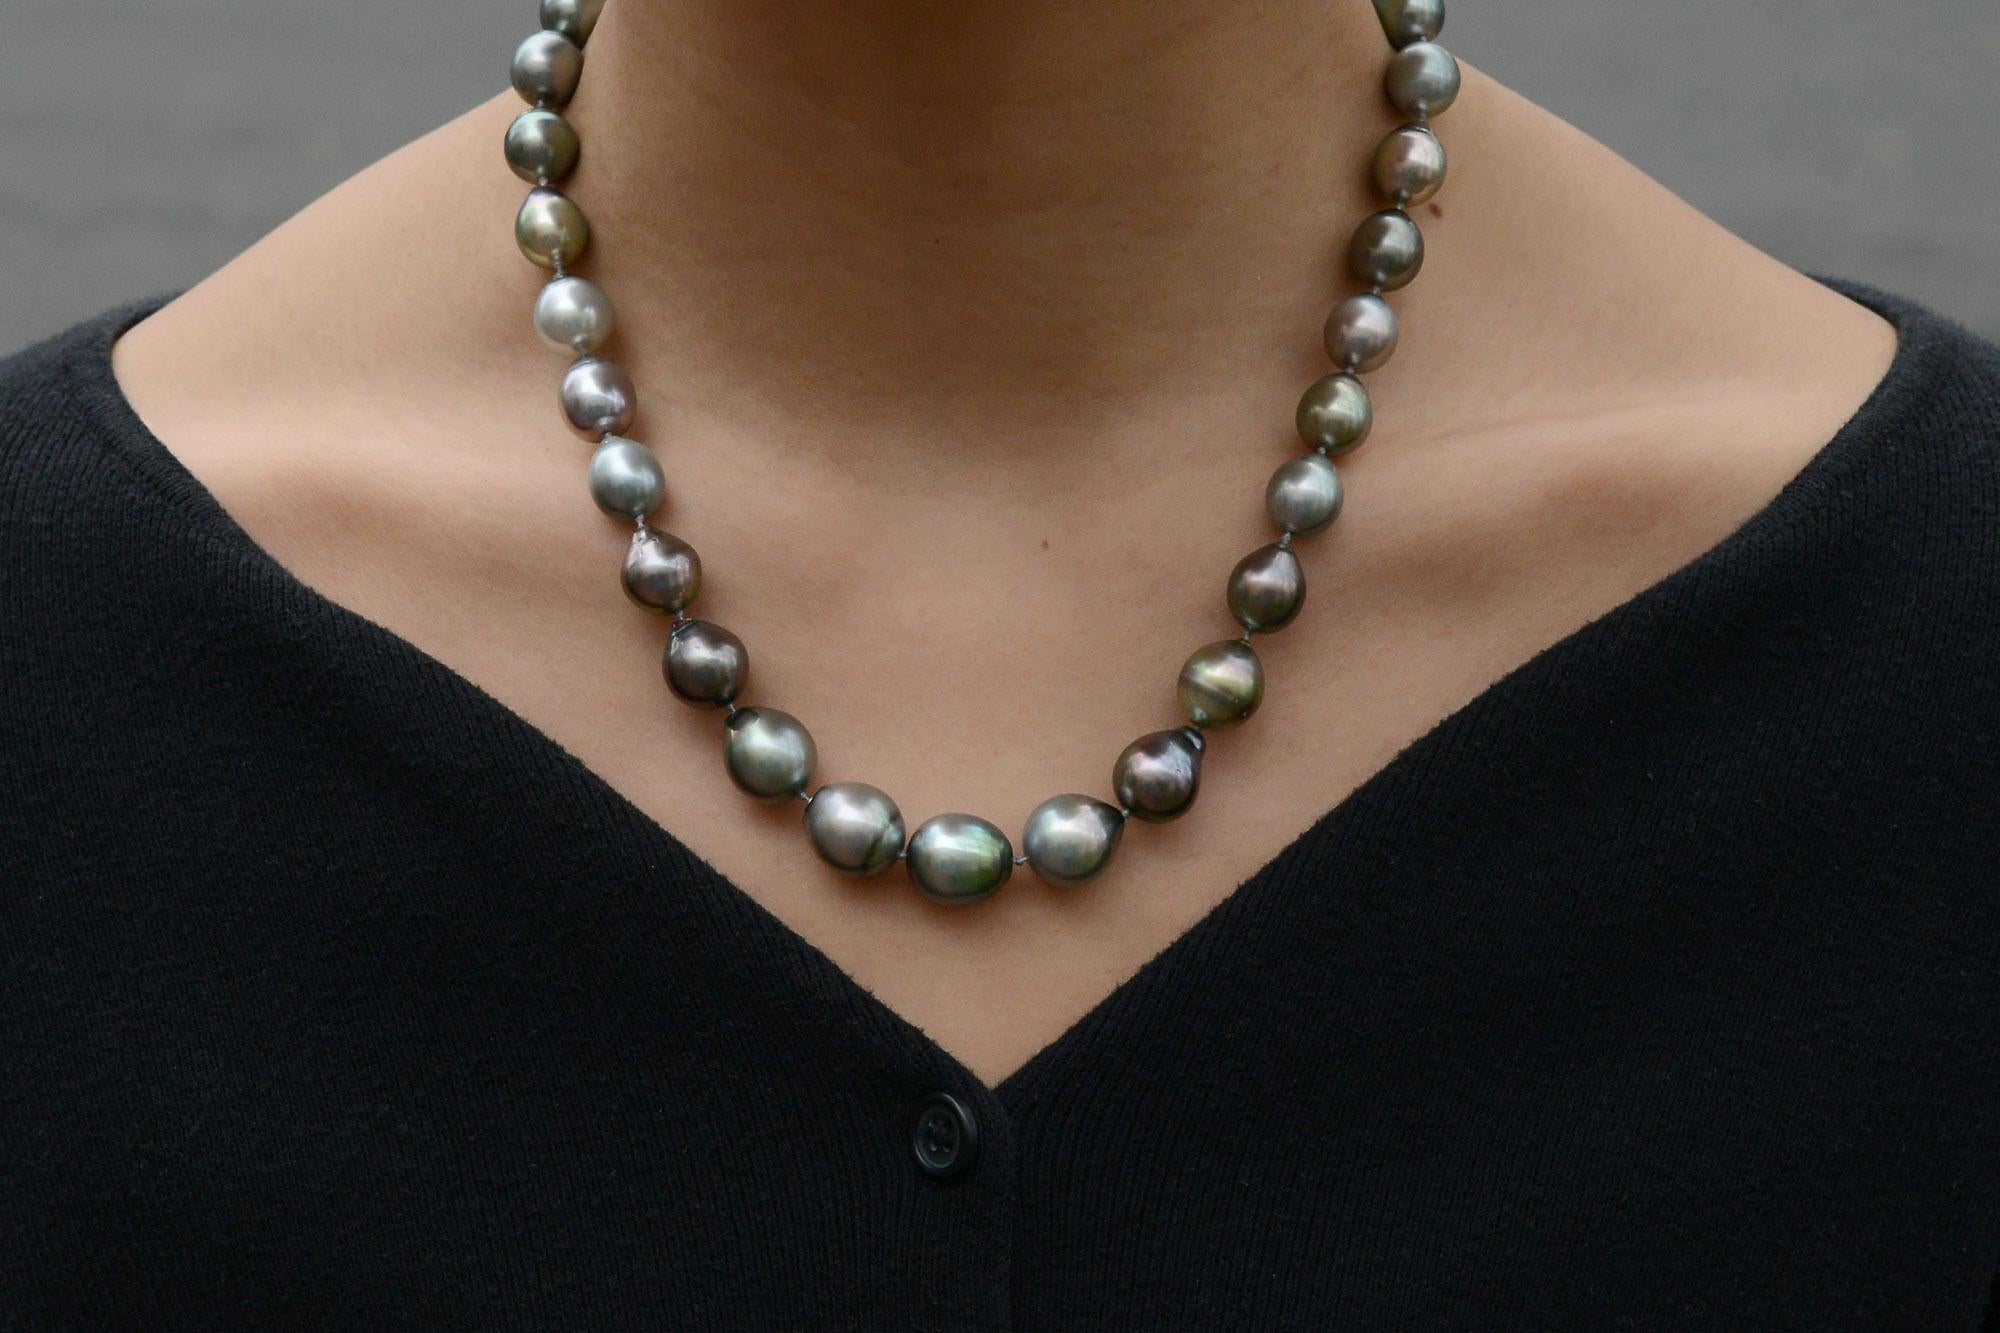 A lovely, lustrous black Tahitian pearl necklace. The graduated strand is composed of 31 baroque and circlè shapes in an ideal 18 1/2